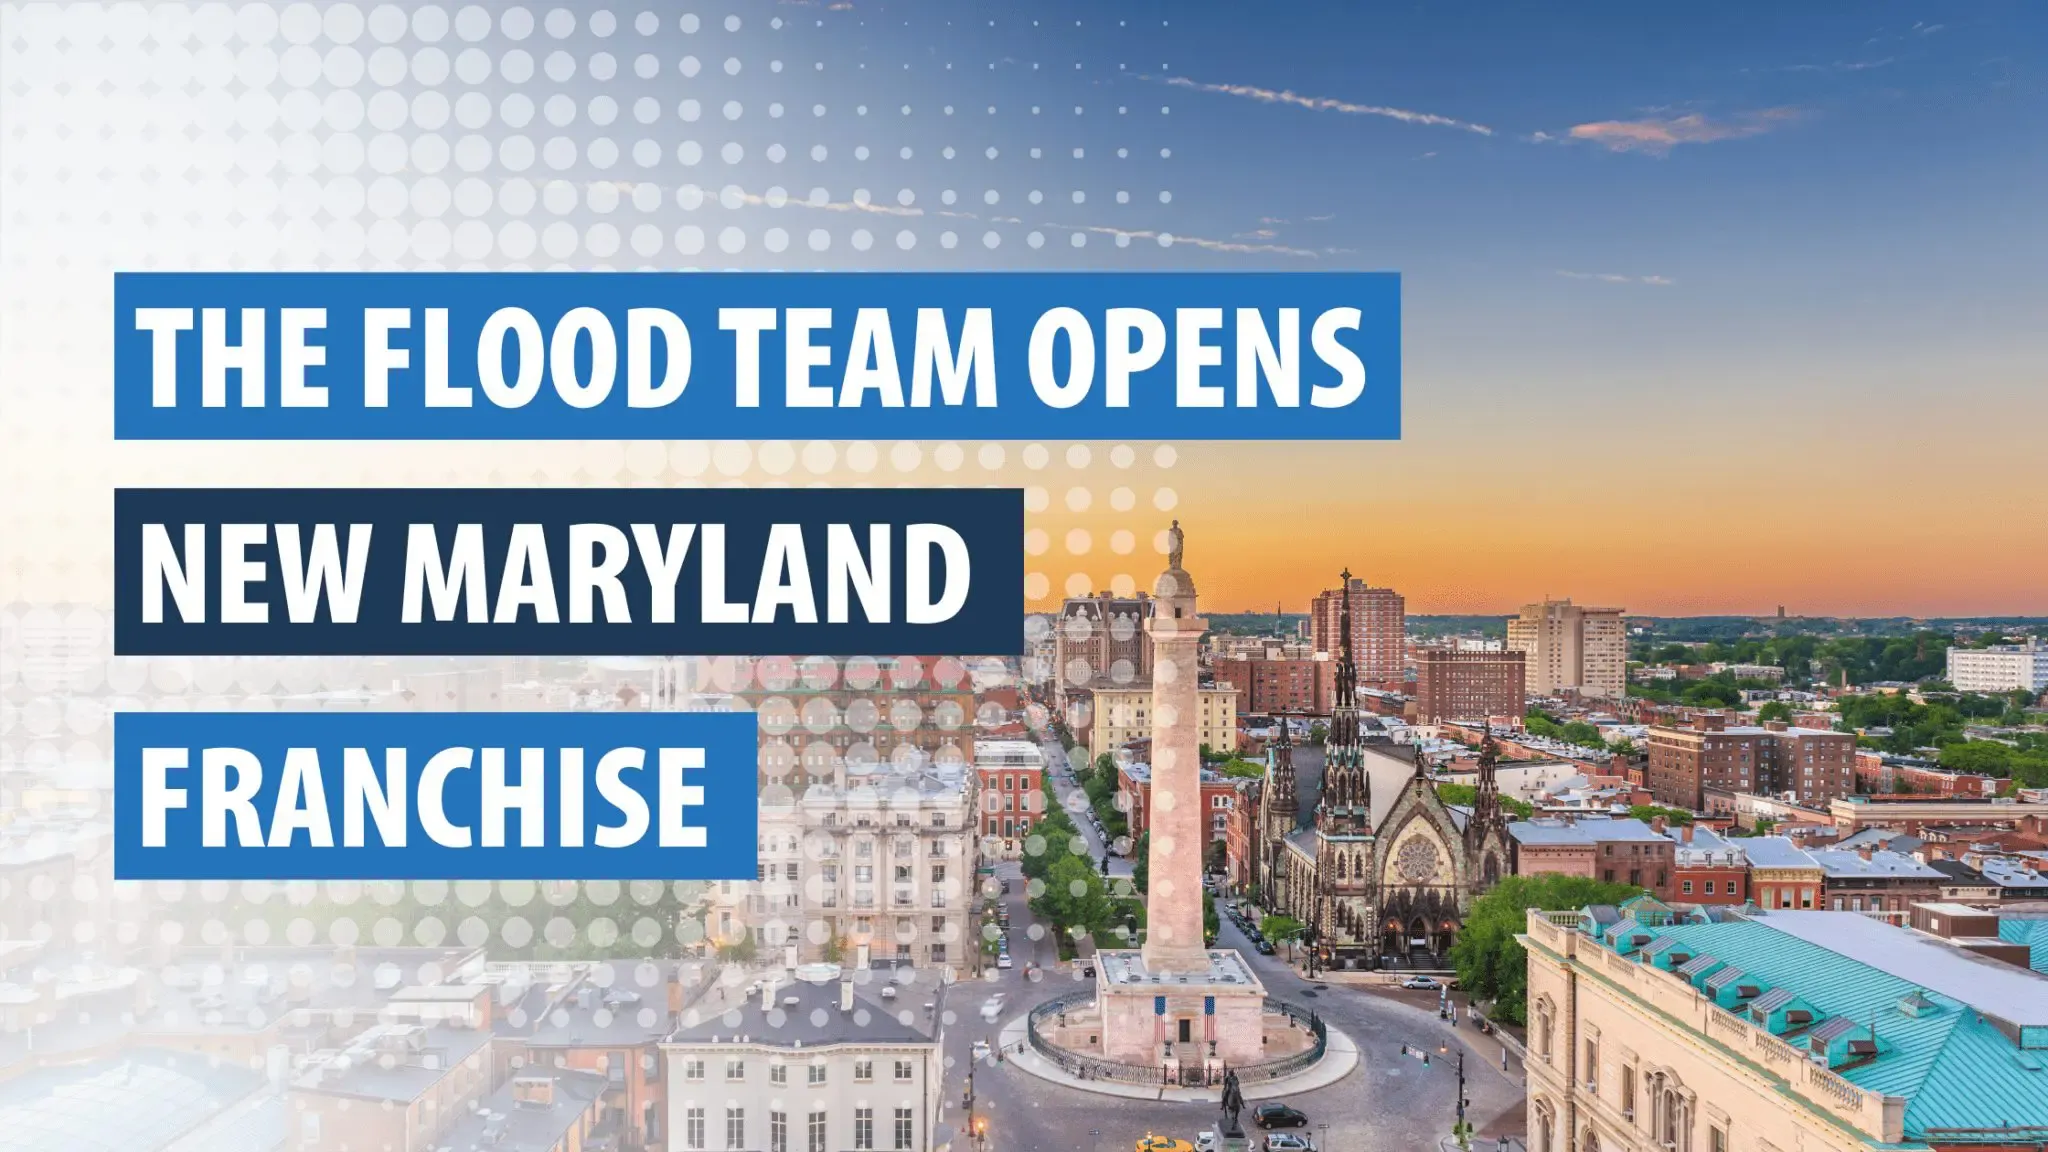 The Flood Team Opens New Maryland Franchise